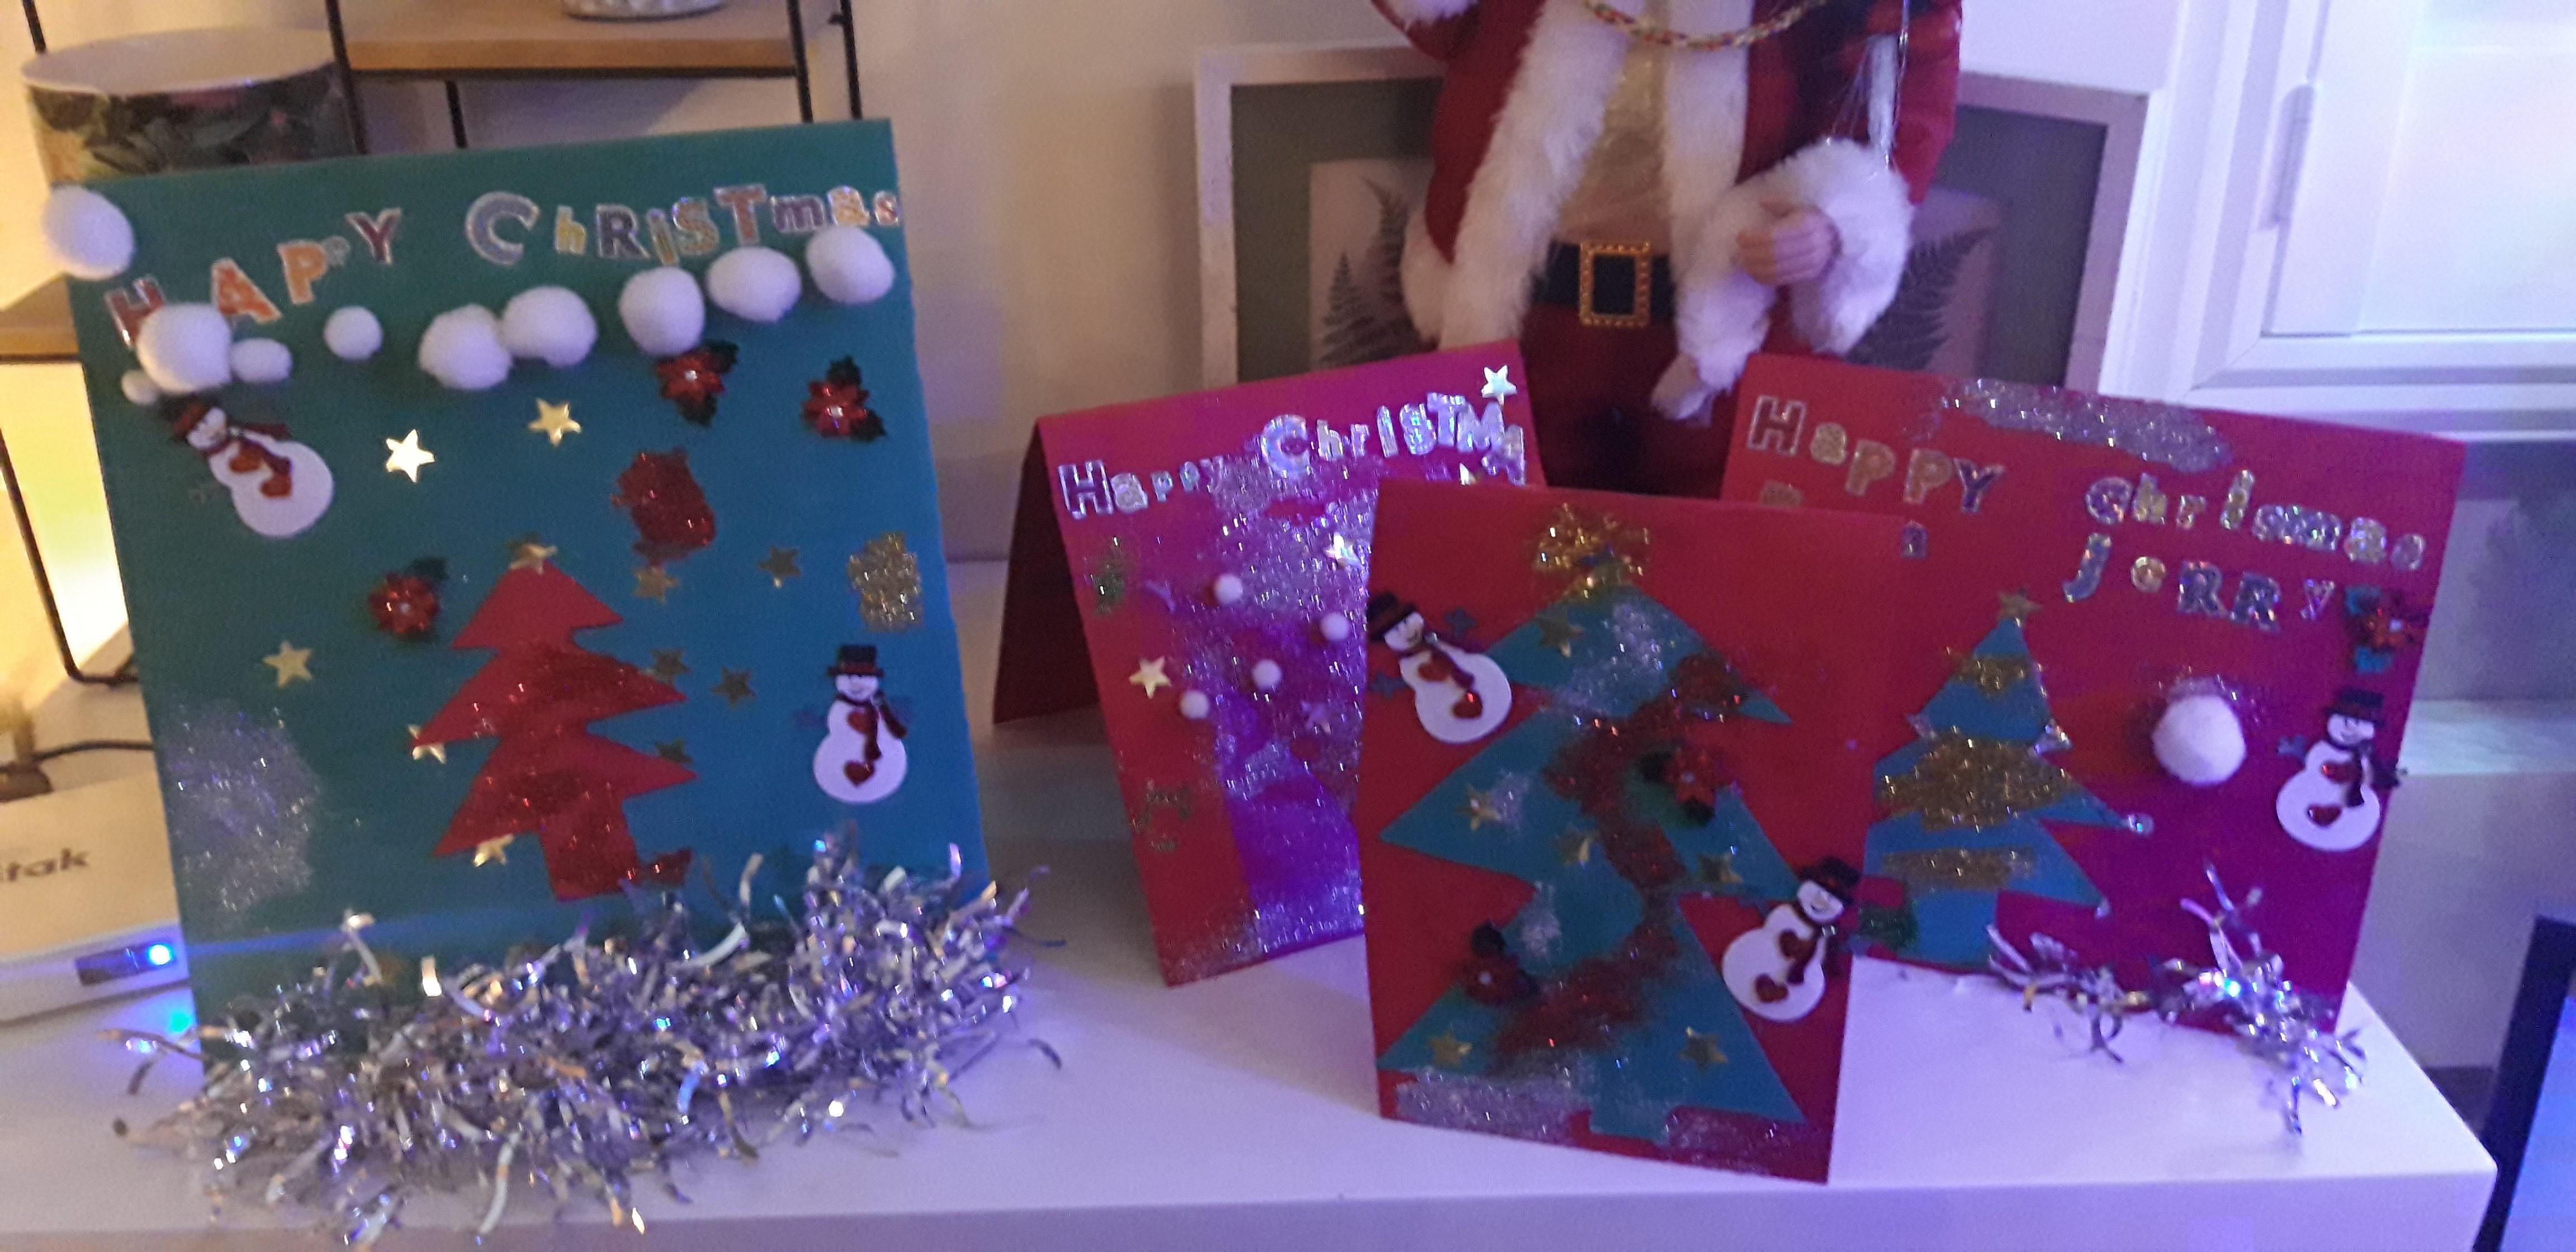 Christmas cards of kindness